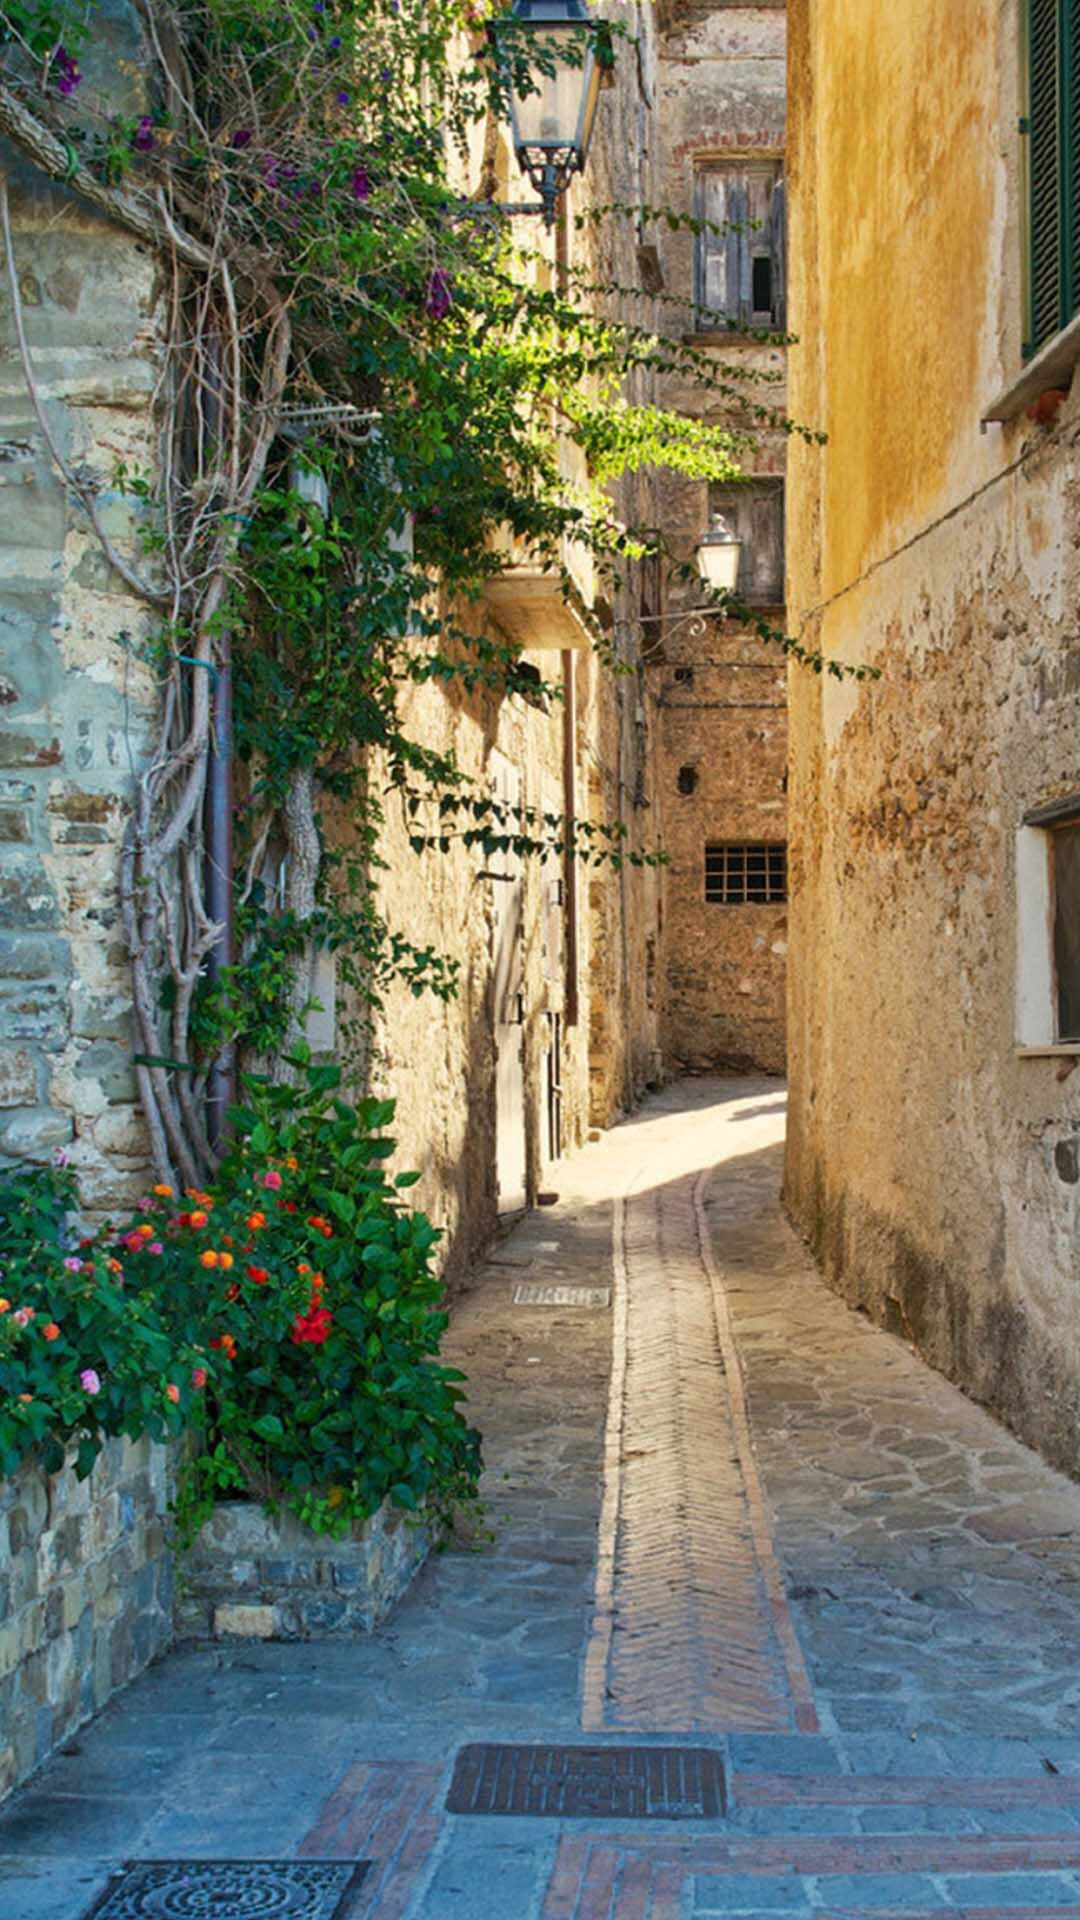 Nature Country Road Sunshine Architecture IPhone 6 Wallpaper Download. IPhone Wallpaper, IPad Wallpaper One Stop Downloa. Italy Holidays, Southern Italy, Italy